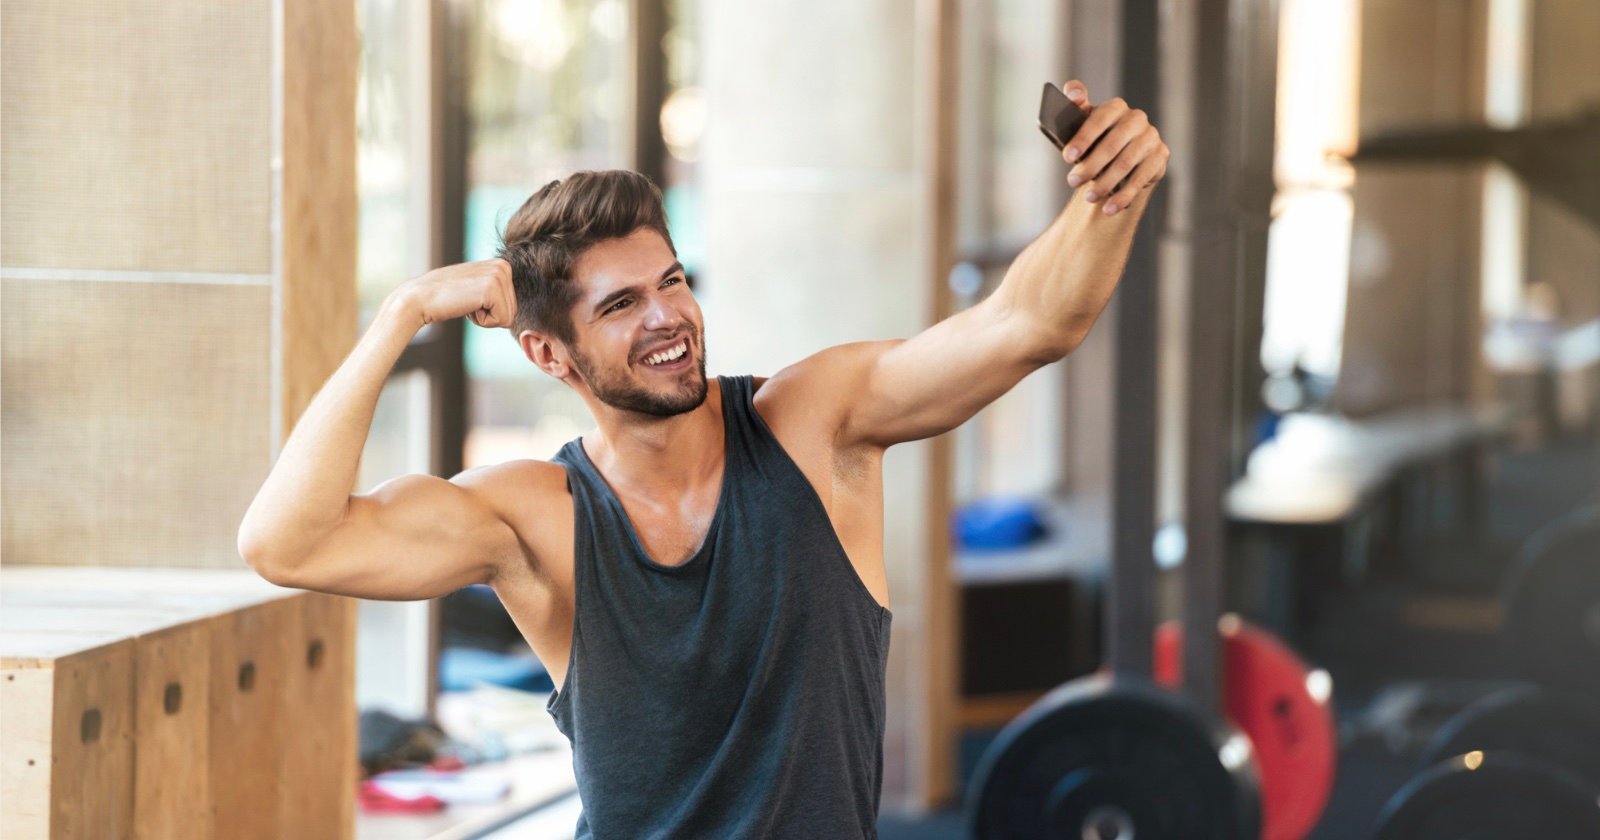  gyms are cracking down cameras selfies 